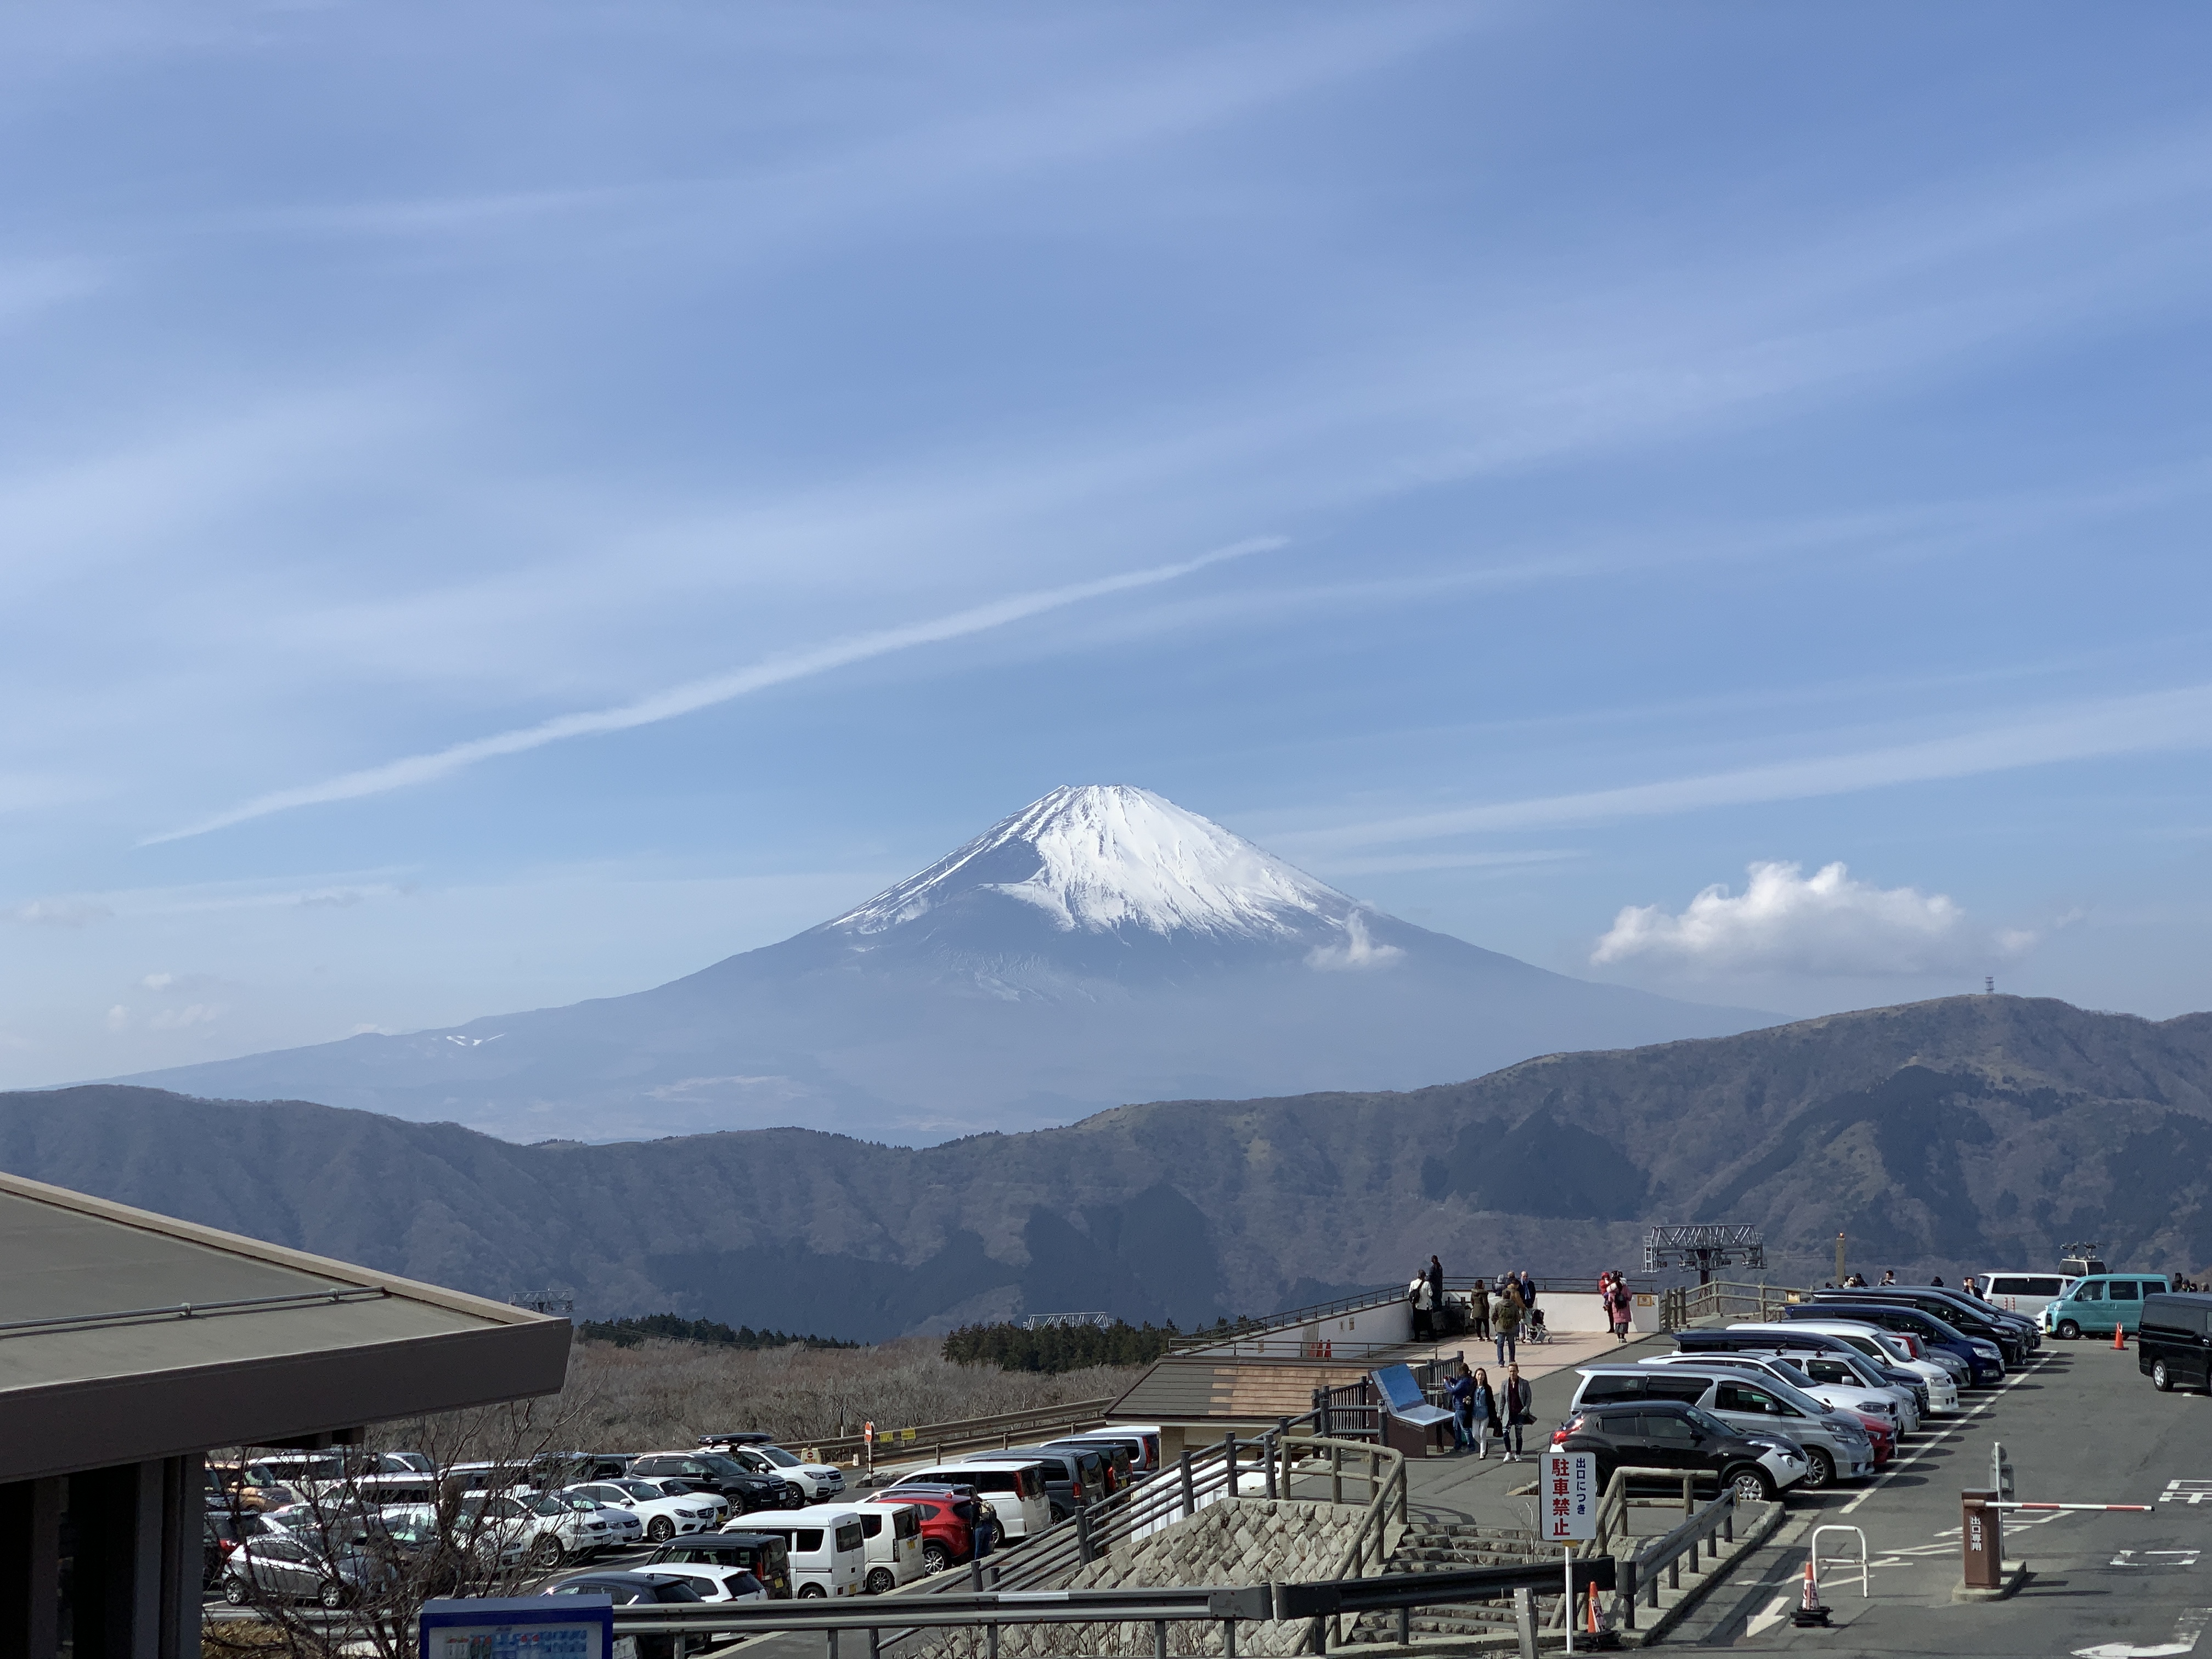 Lucky to see Mt. Fuji from Owakudani, it is such an existence makes me feel calm